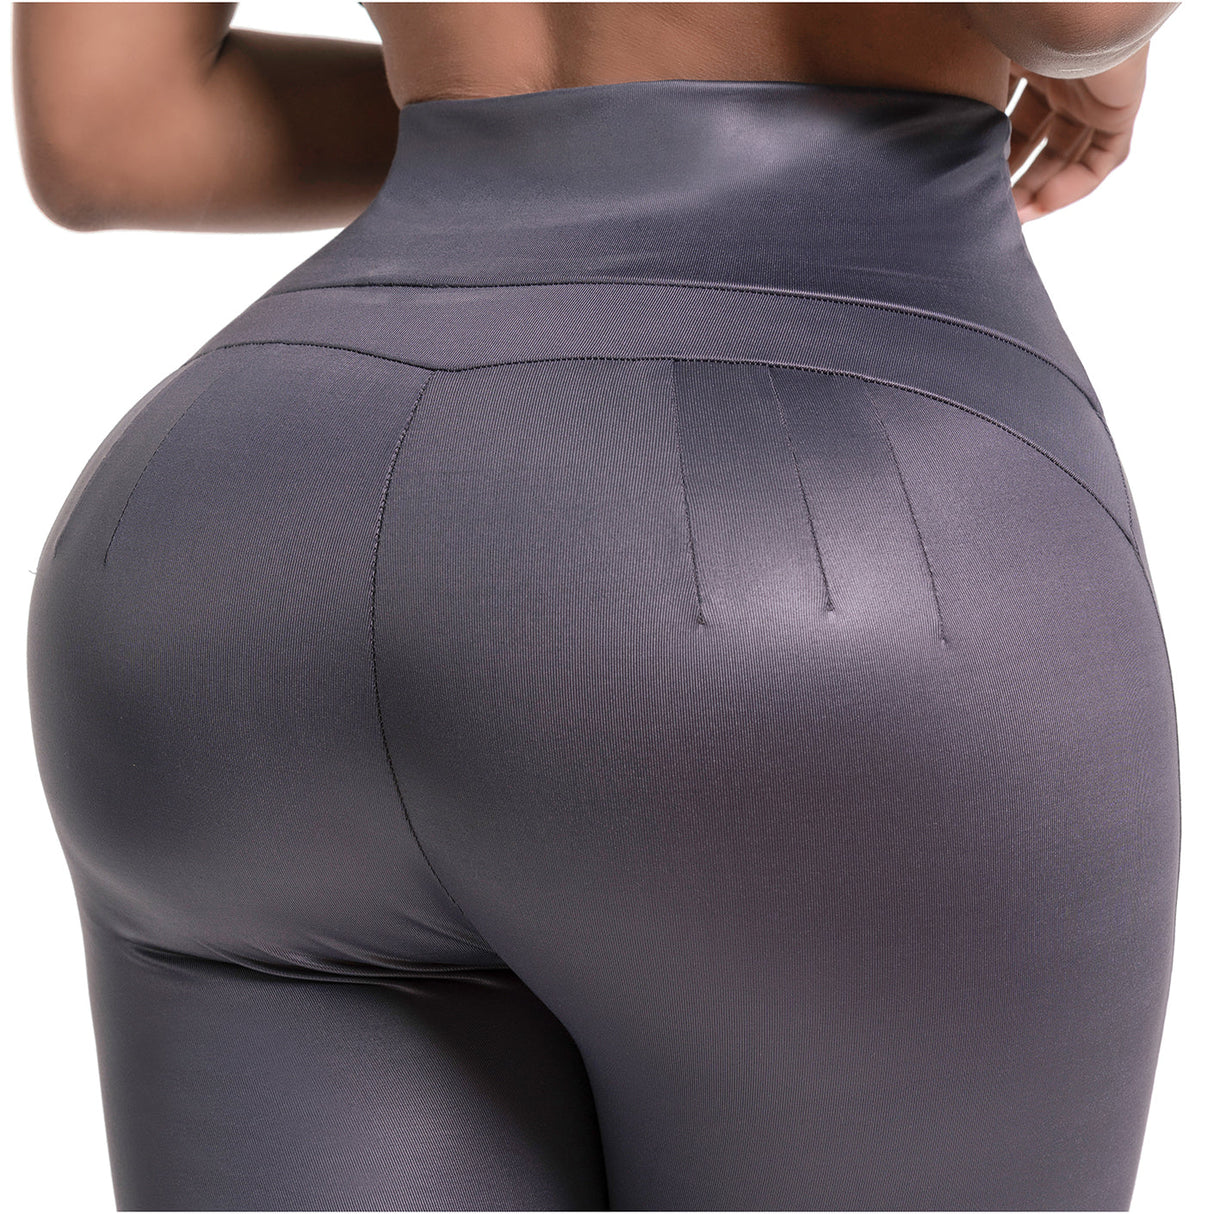 leggings colombianas, leggings colombianas Suppliers and